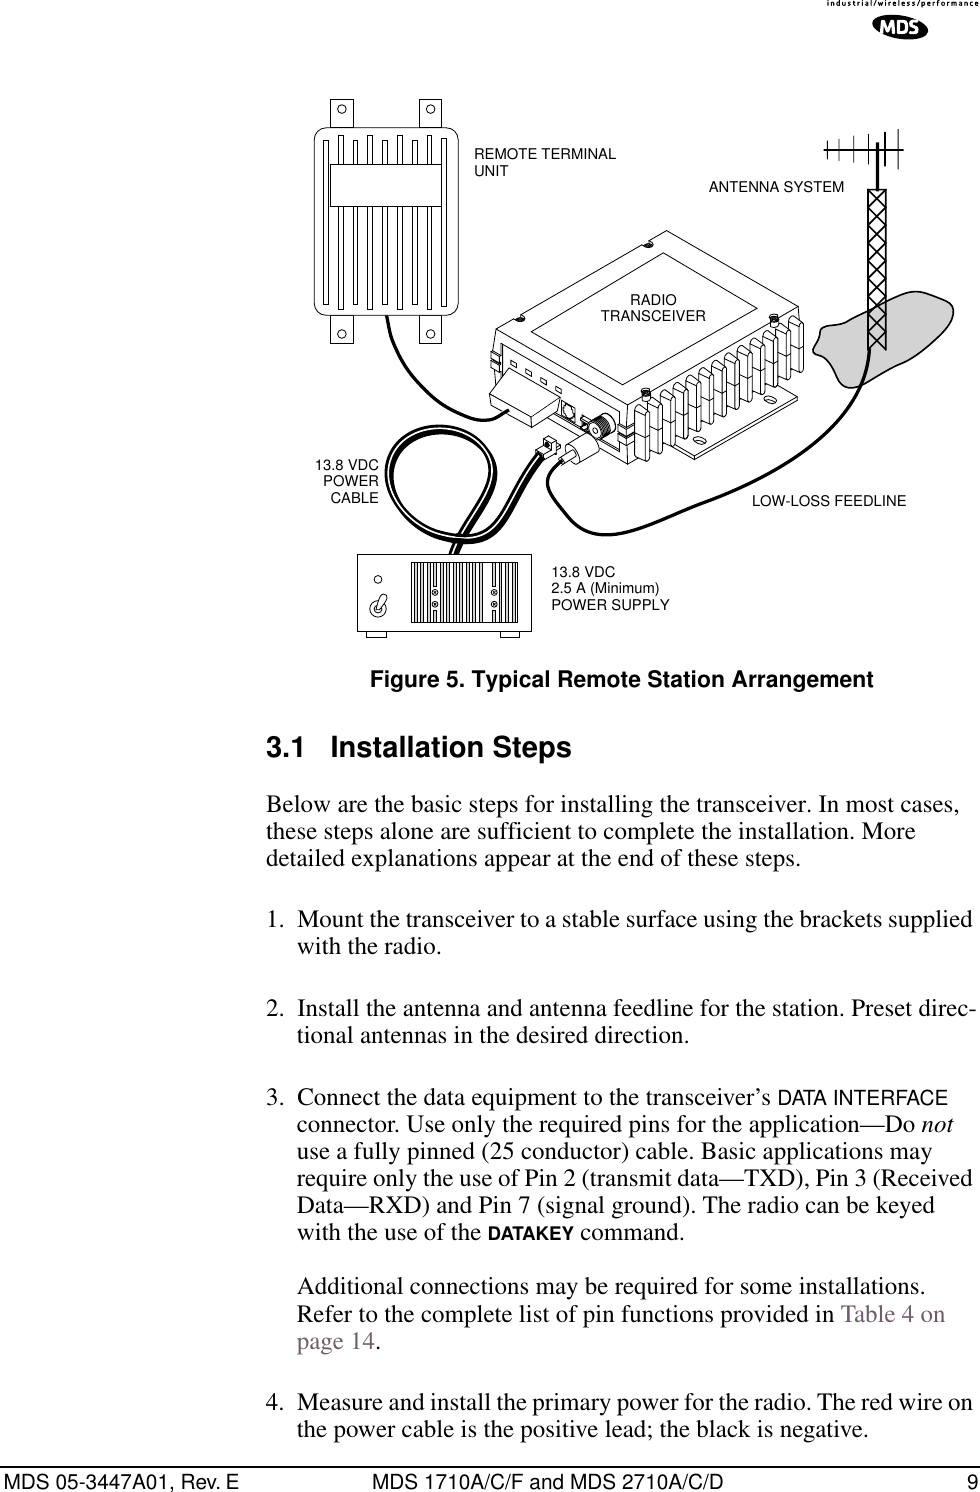 MDS 05-3447A01, Rev. E MDS 1710A/C/F and MDS 2710A/C/D 9Invisible place holderFigure 5. Typical Remote Station Arrangement3.1 Installation StepsBelow are the basic steps for installing the transceiver. In most cases, these steps alone are sufficient to complete the installation. More detailed explanations appear at the end of these steps.1. Mount the transceiver to a stable surface using the brackets supplied with the radio.2. Install the antenna and antenna feedline for the station. Preset direc-tional antennas in the desired direction.3. Connect the data equipment to the transceiver’s DATA INTERFACE connector. Use only the required pins for the application—Do not use a fully pinned (25 conductor) cable. Basic applications may require only the use of Pin 2 (transmit data—TXD), Pin 3 (Received Data—RXD) and Pin 7 (signal ground). The radio can be keyed with the use of the DATAKEY command.Additional connections may be required for some installations. Refer to the complete list of pin functions provided in Table 4 on page 14.4. Measure and install the primary power for the radio. The red wire on the power cable is the positive lead; the black is negative.13.8 VDCPOWER CABLE13.8 VDC2.5 A (Minimum)POWER SUPPLYREMOTE TERMINAL UNIT ANTENNA SYSTEMLOW-LOSS FEEDLINERADIO TRANSCEIVER